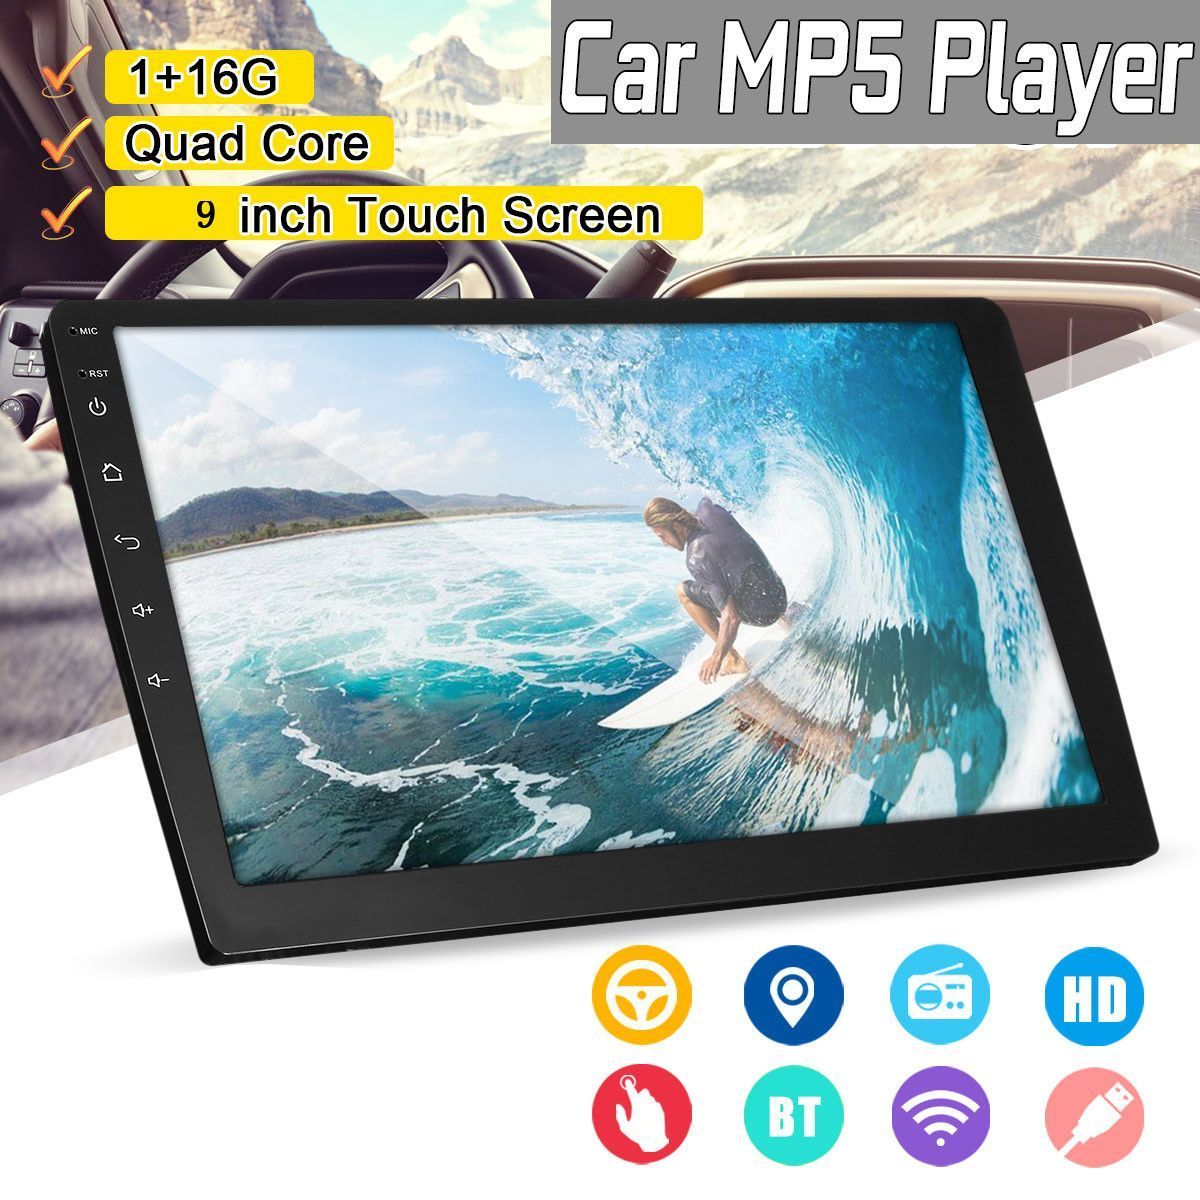 9-Inch-2-DIN-Car-MP5-Player-Quad-Core-116G-Stereo-Radio-IPS-Touch-Screen-bluetooth-FM-DAB-DVR-1534929